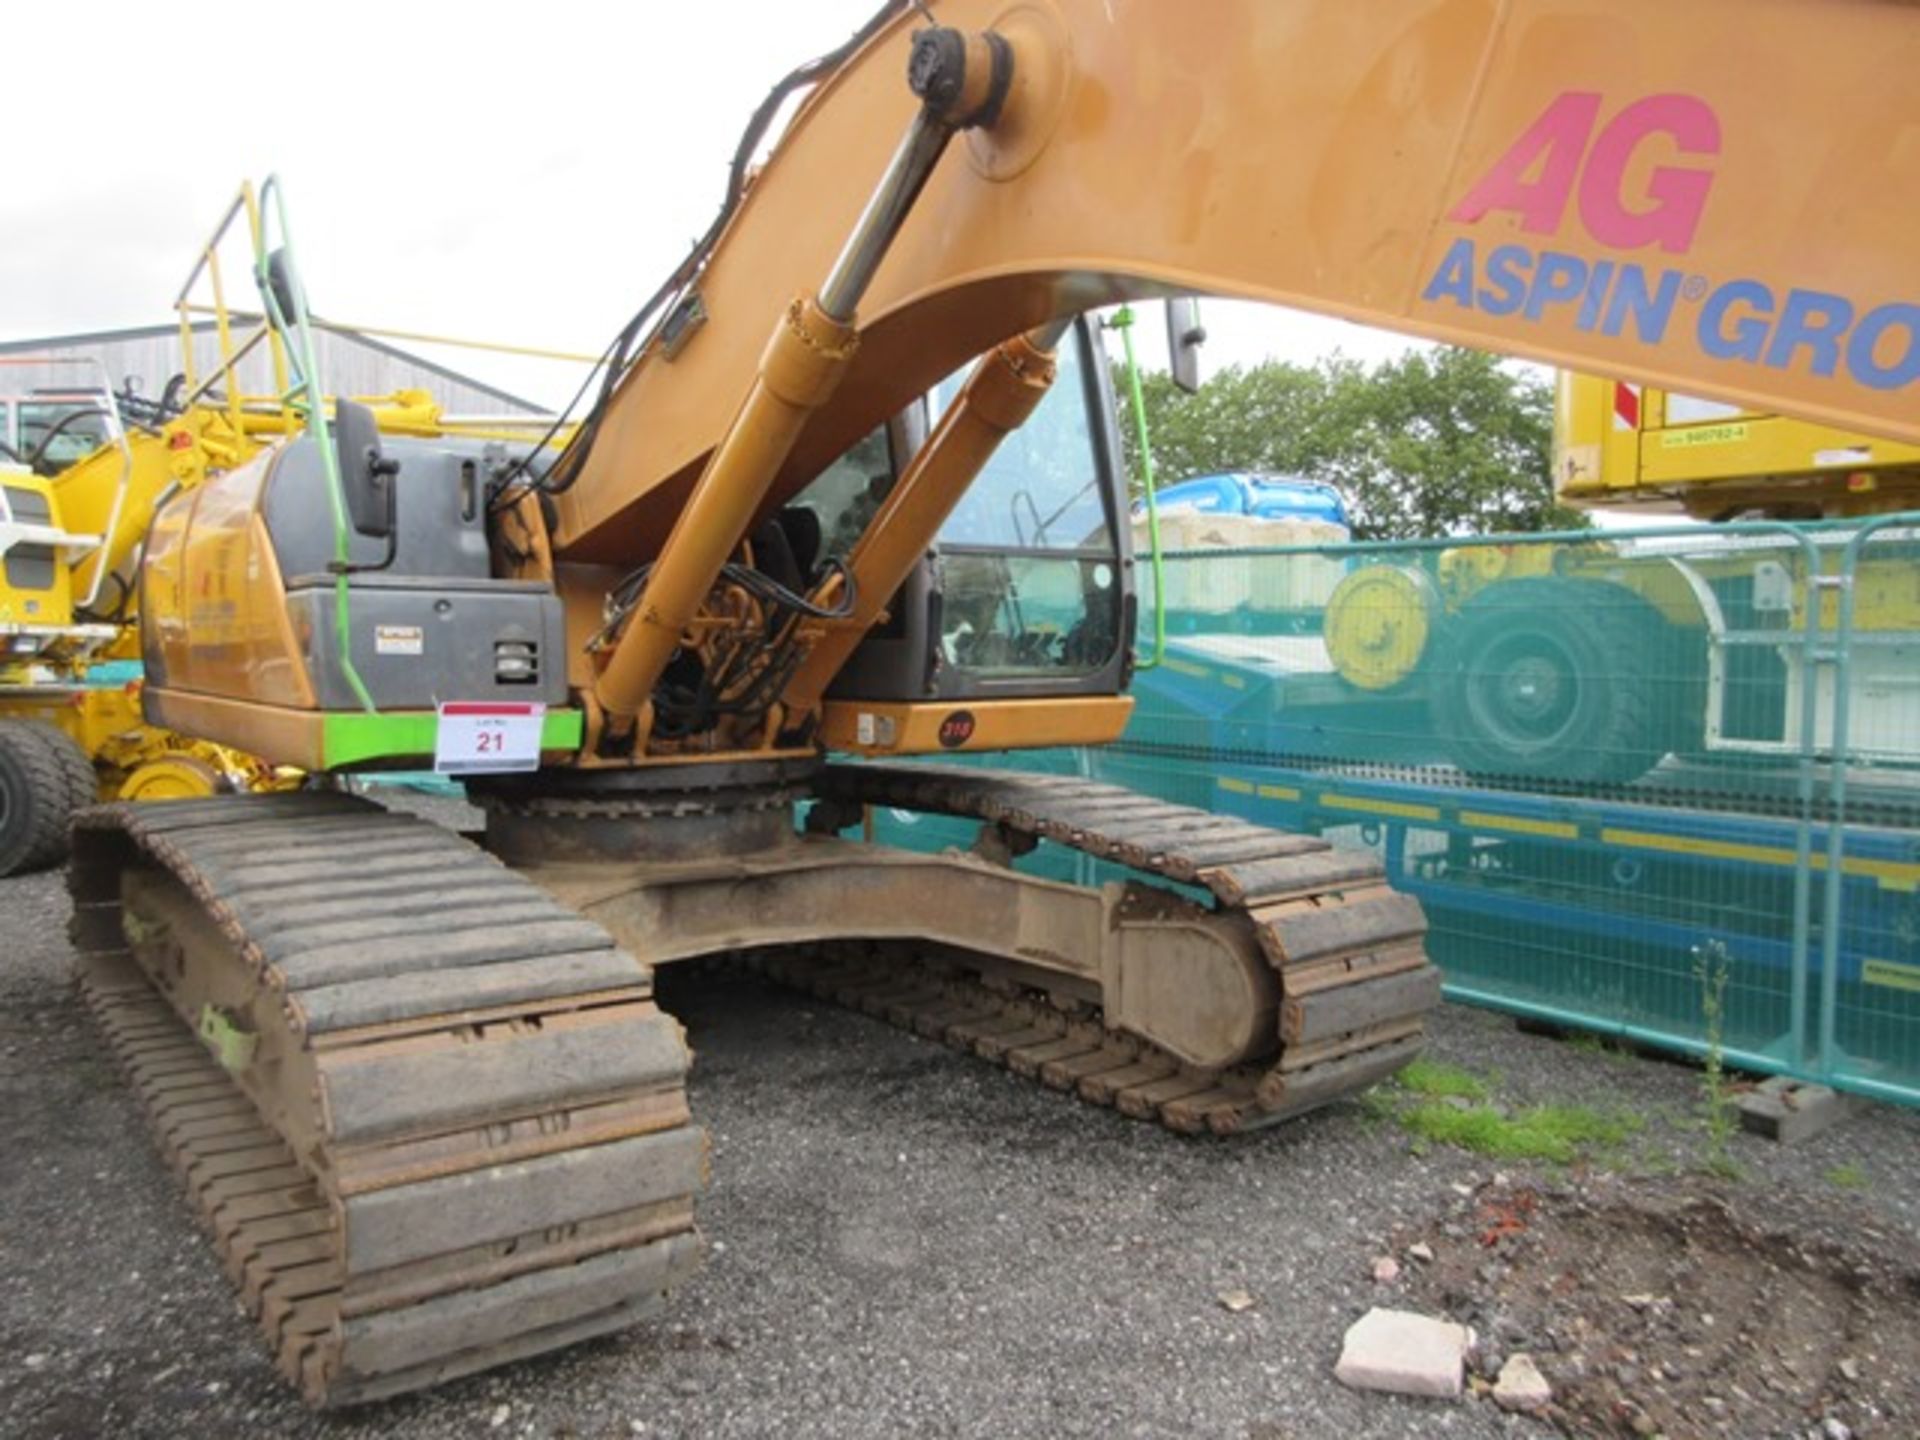 Case CX240B tracked hydraulic excavator s/n DCH240R5N7EAM1155 (2007) running hours approx 7,990.